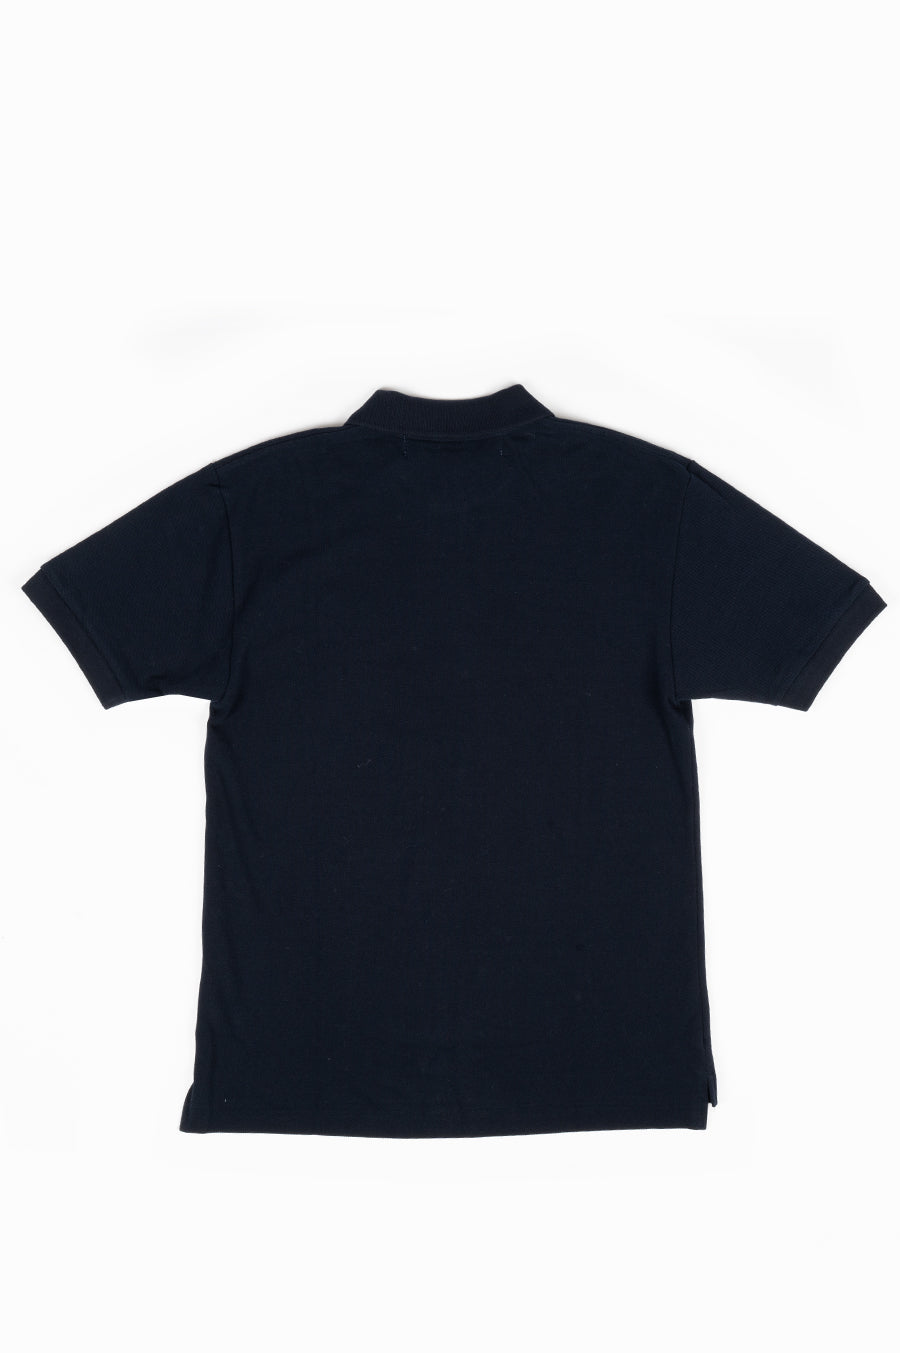 COMME DES GARCONS PLAY POLO TSHIRT NAVY RED HEART